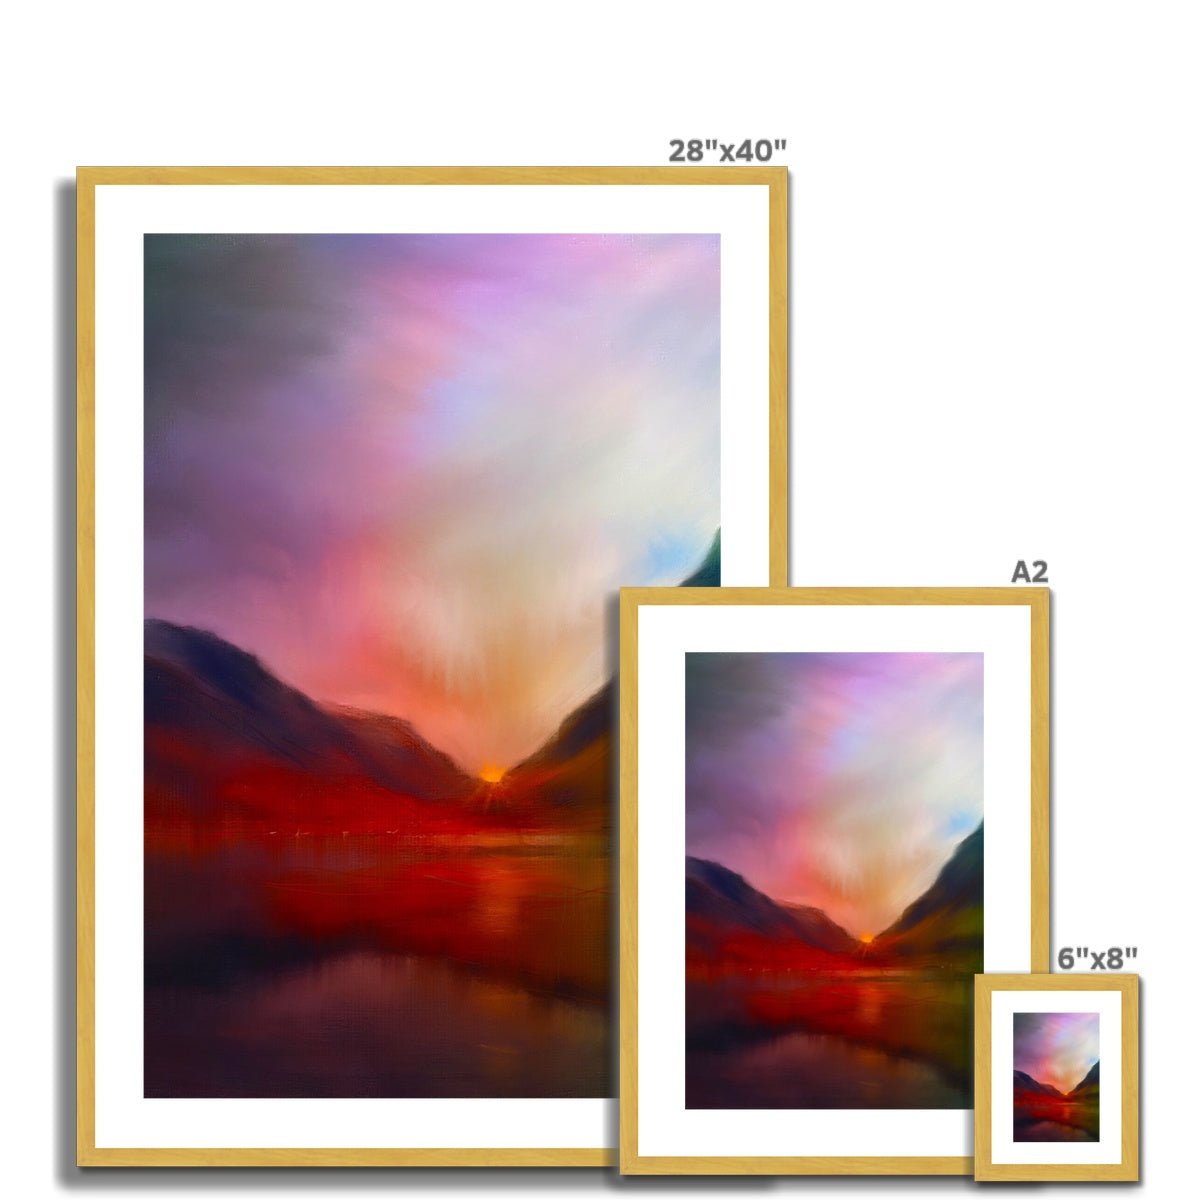 Glencoe Sunset Painting | Antique Framed & Mounted Prints From Scotland-Antique Framed & Mounted Prints-Glencoe Art Gallery-Paintings, Prints, Homeware, Art Gifts From Scotland By Scottish Artist Kevin Hunter